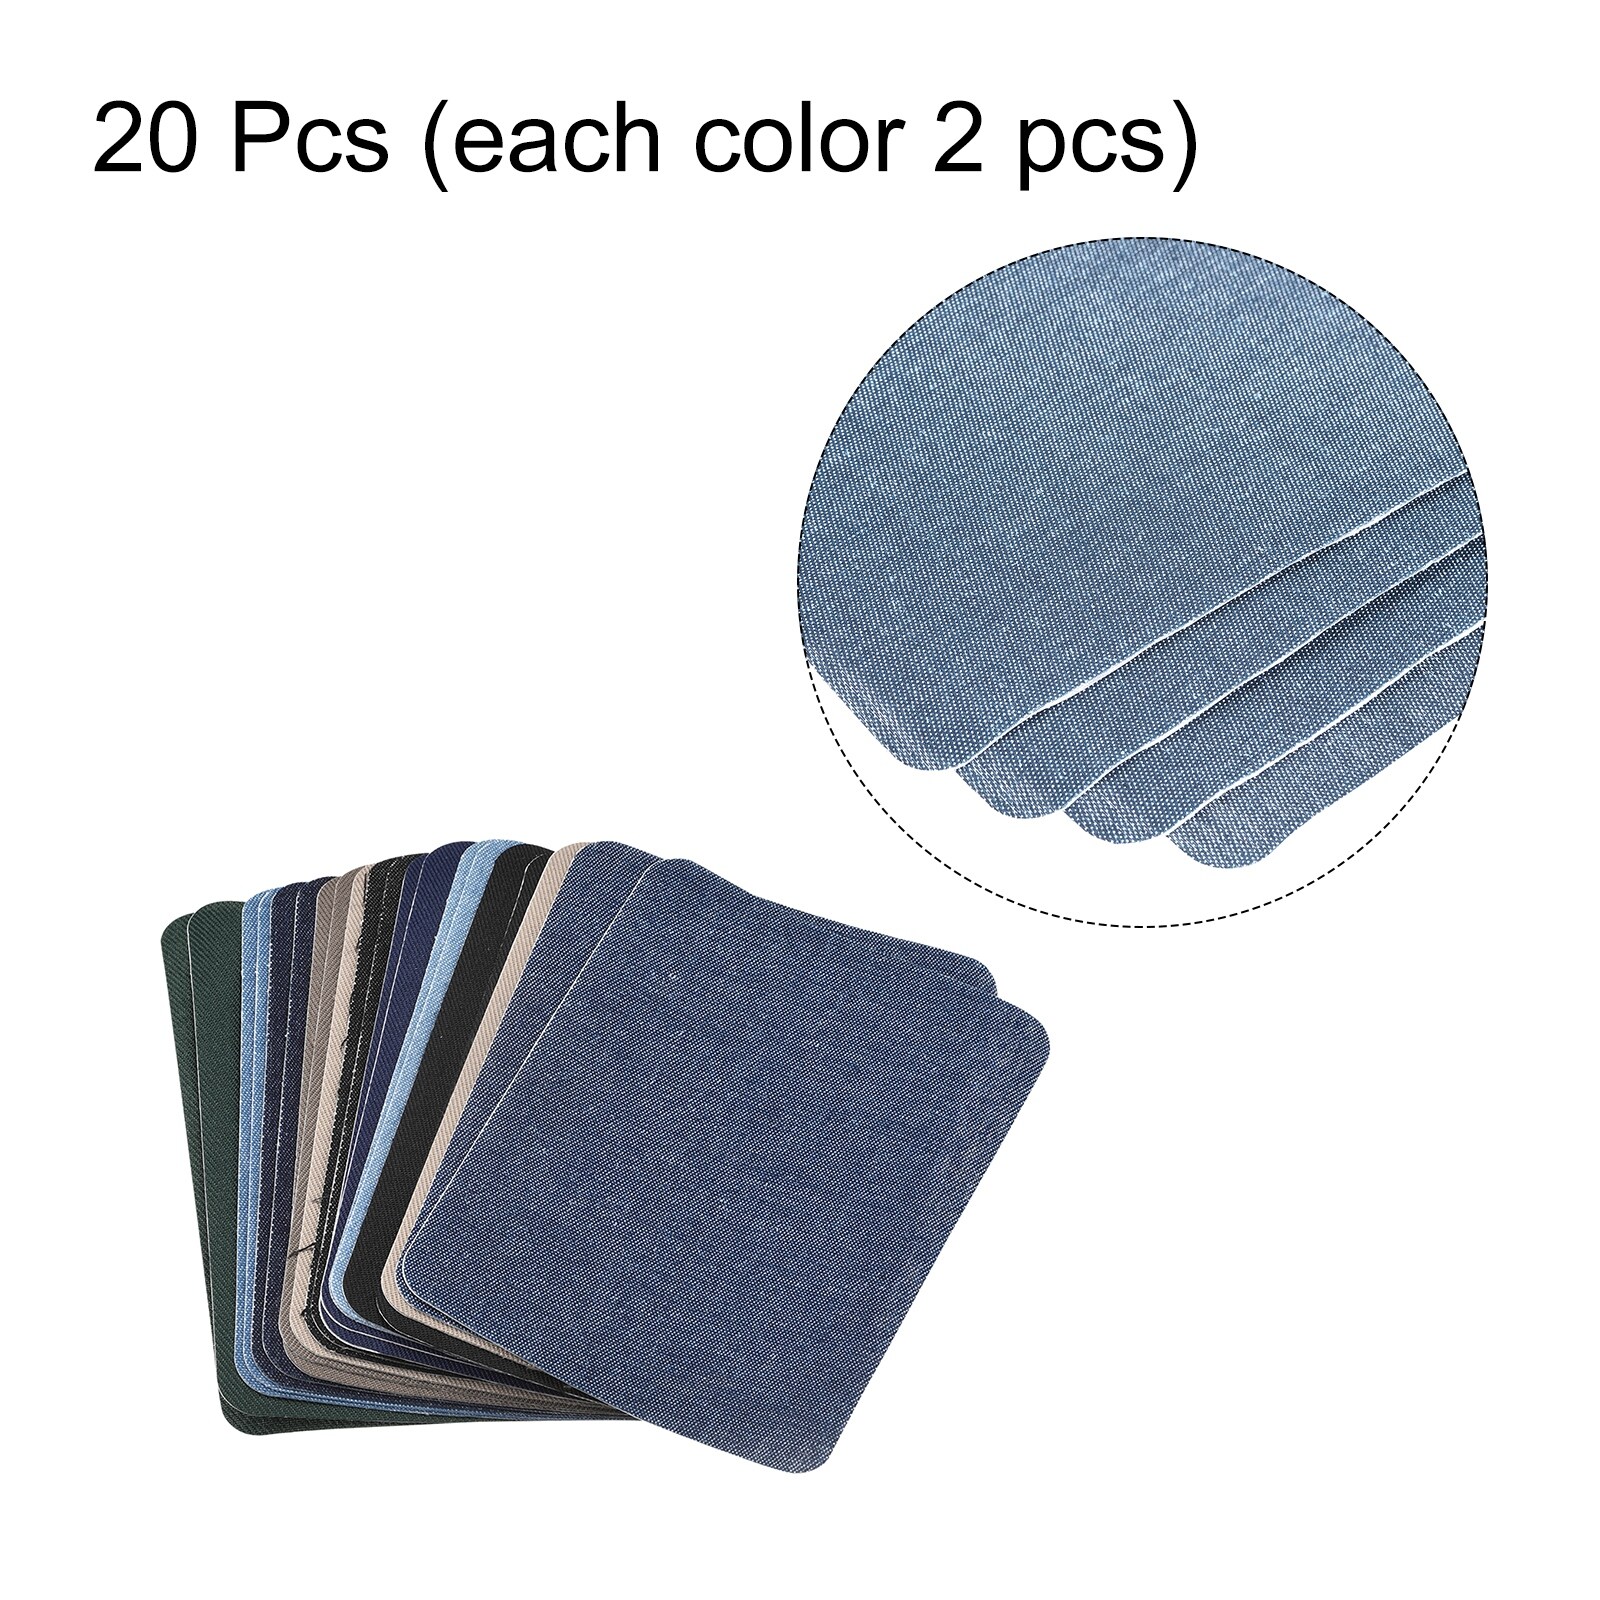 Fabric Patch Iron-on Patches 10 Colors 4.9x3.7 for Clothes Pack of 20 -  10 Colors - Bed Bath & Beyond - 36707796